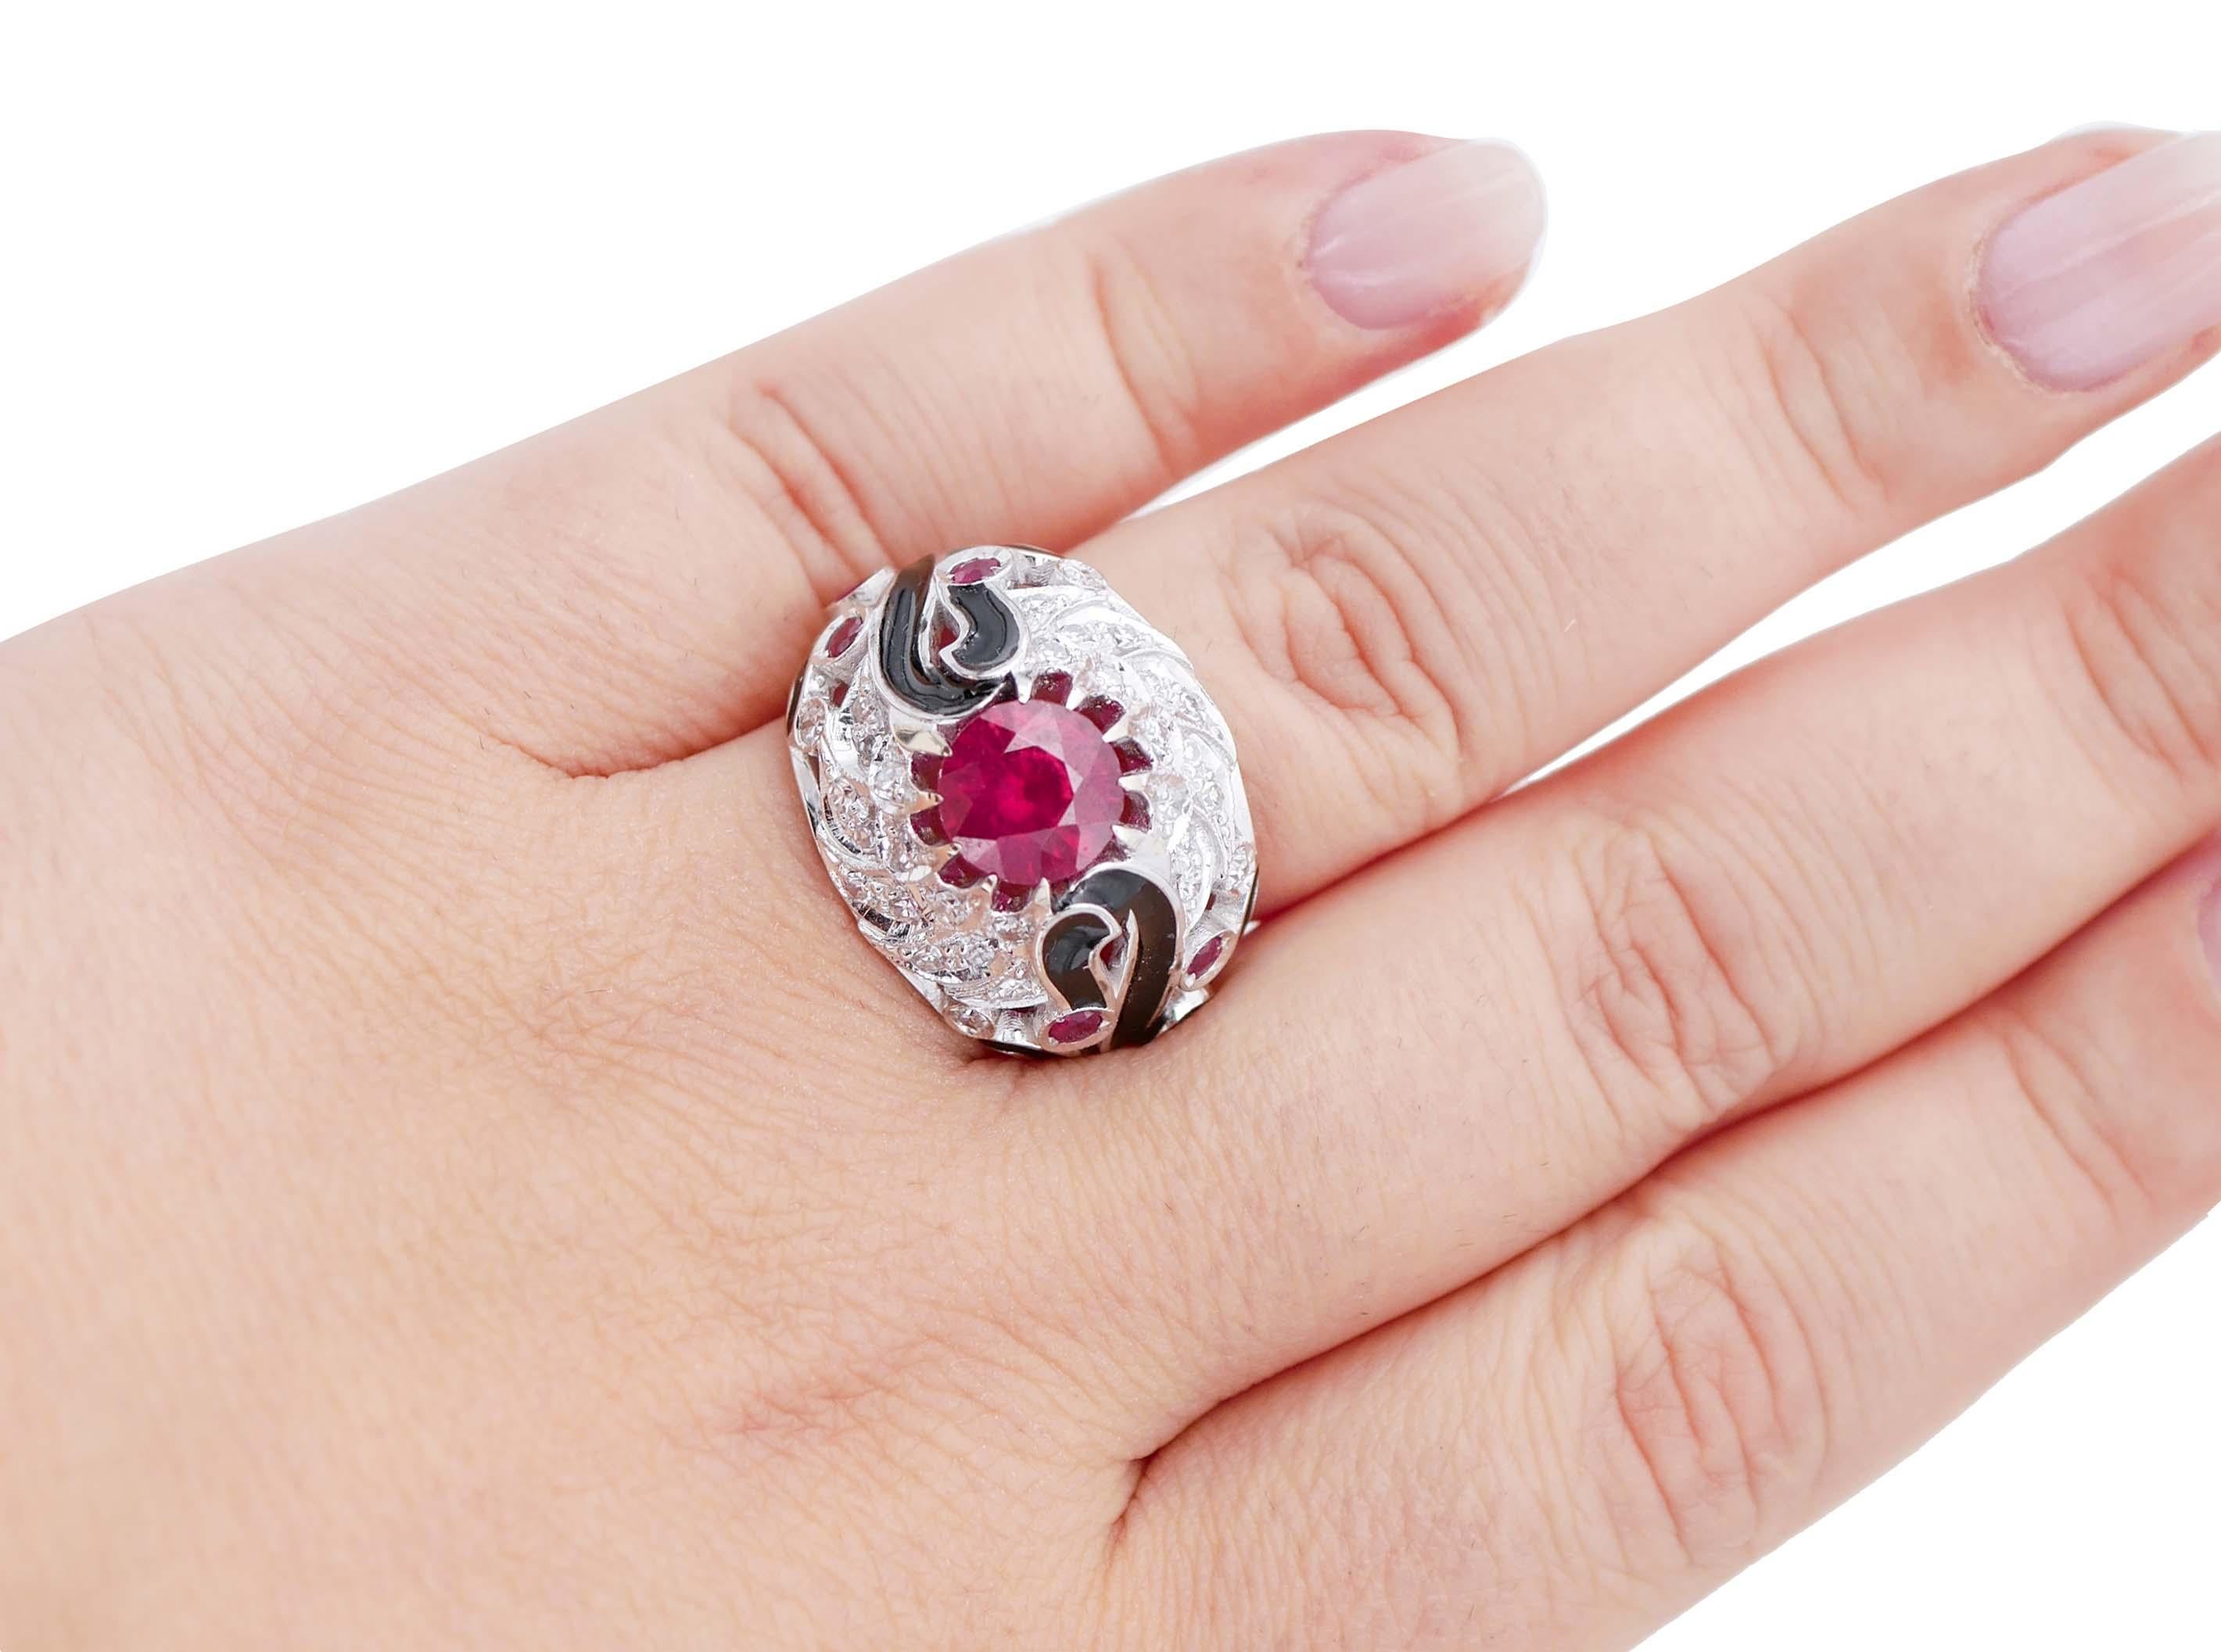 Rubies, Enamel, Diamonds, 18 Karat White Gold Ring In Good Condition For Sale In Marcianise, Marcianise (CE)